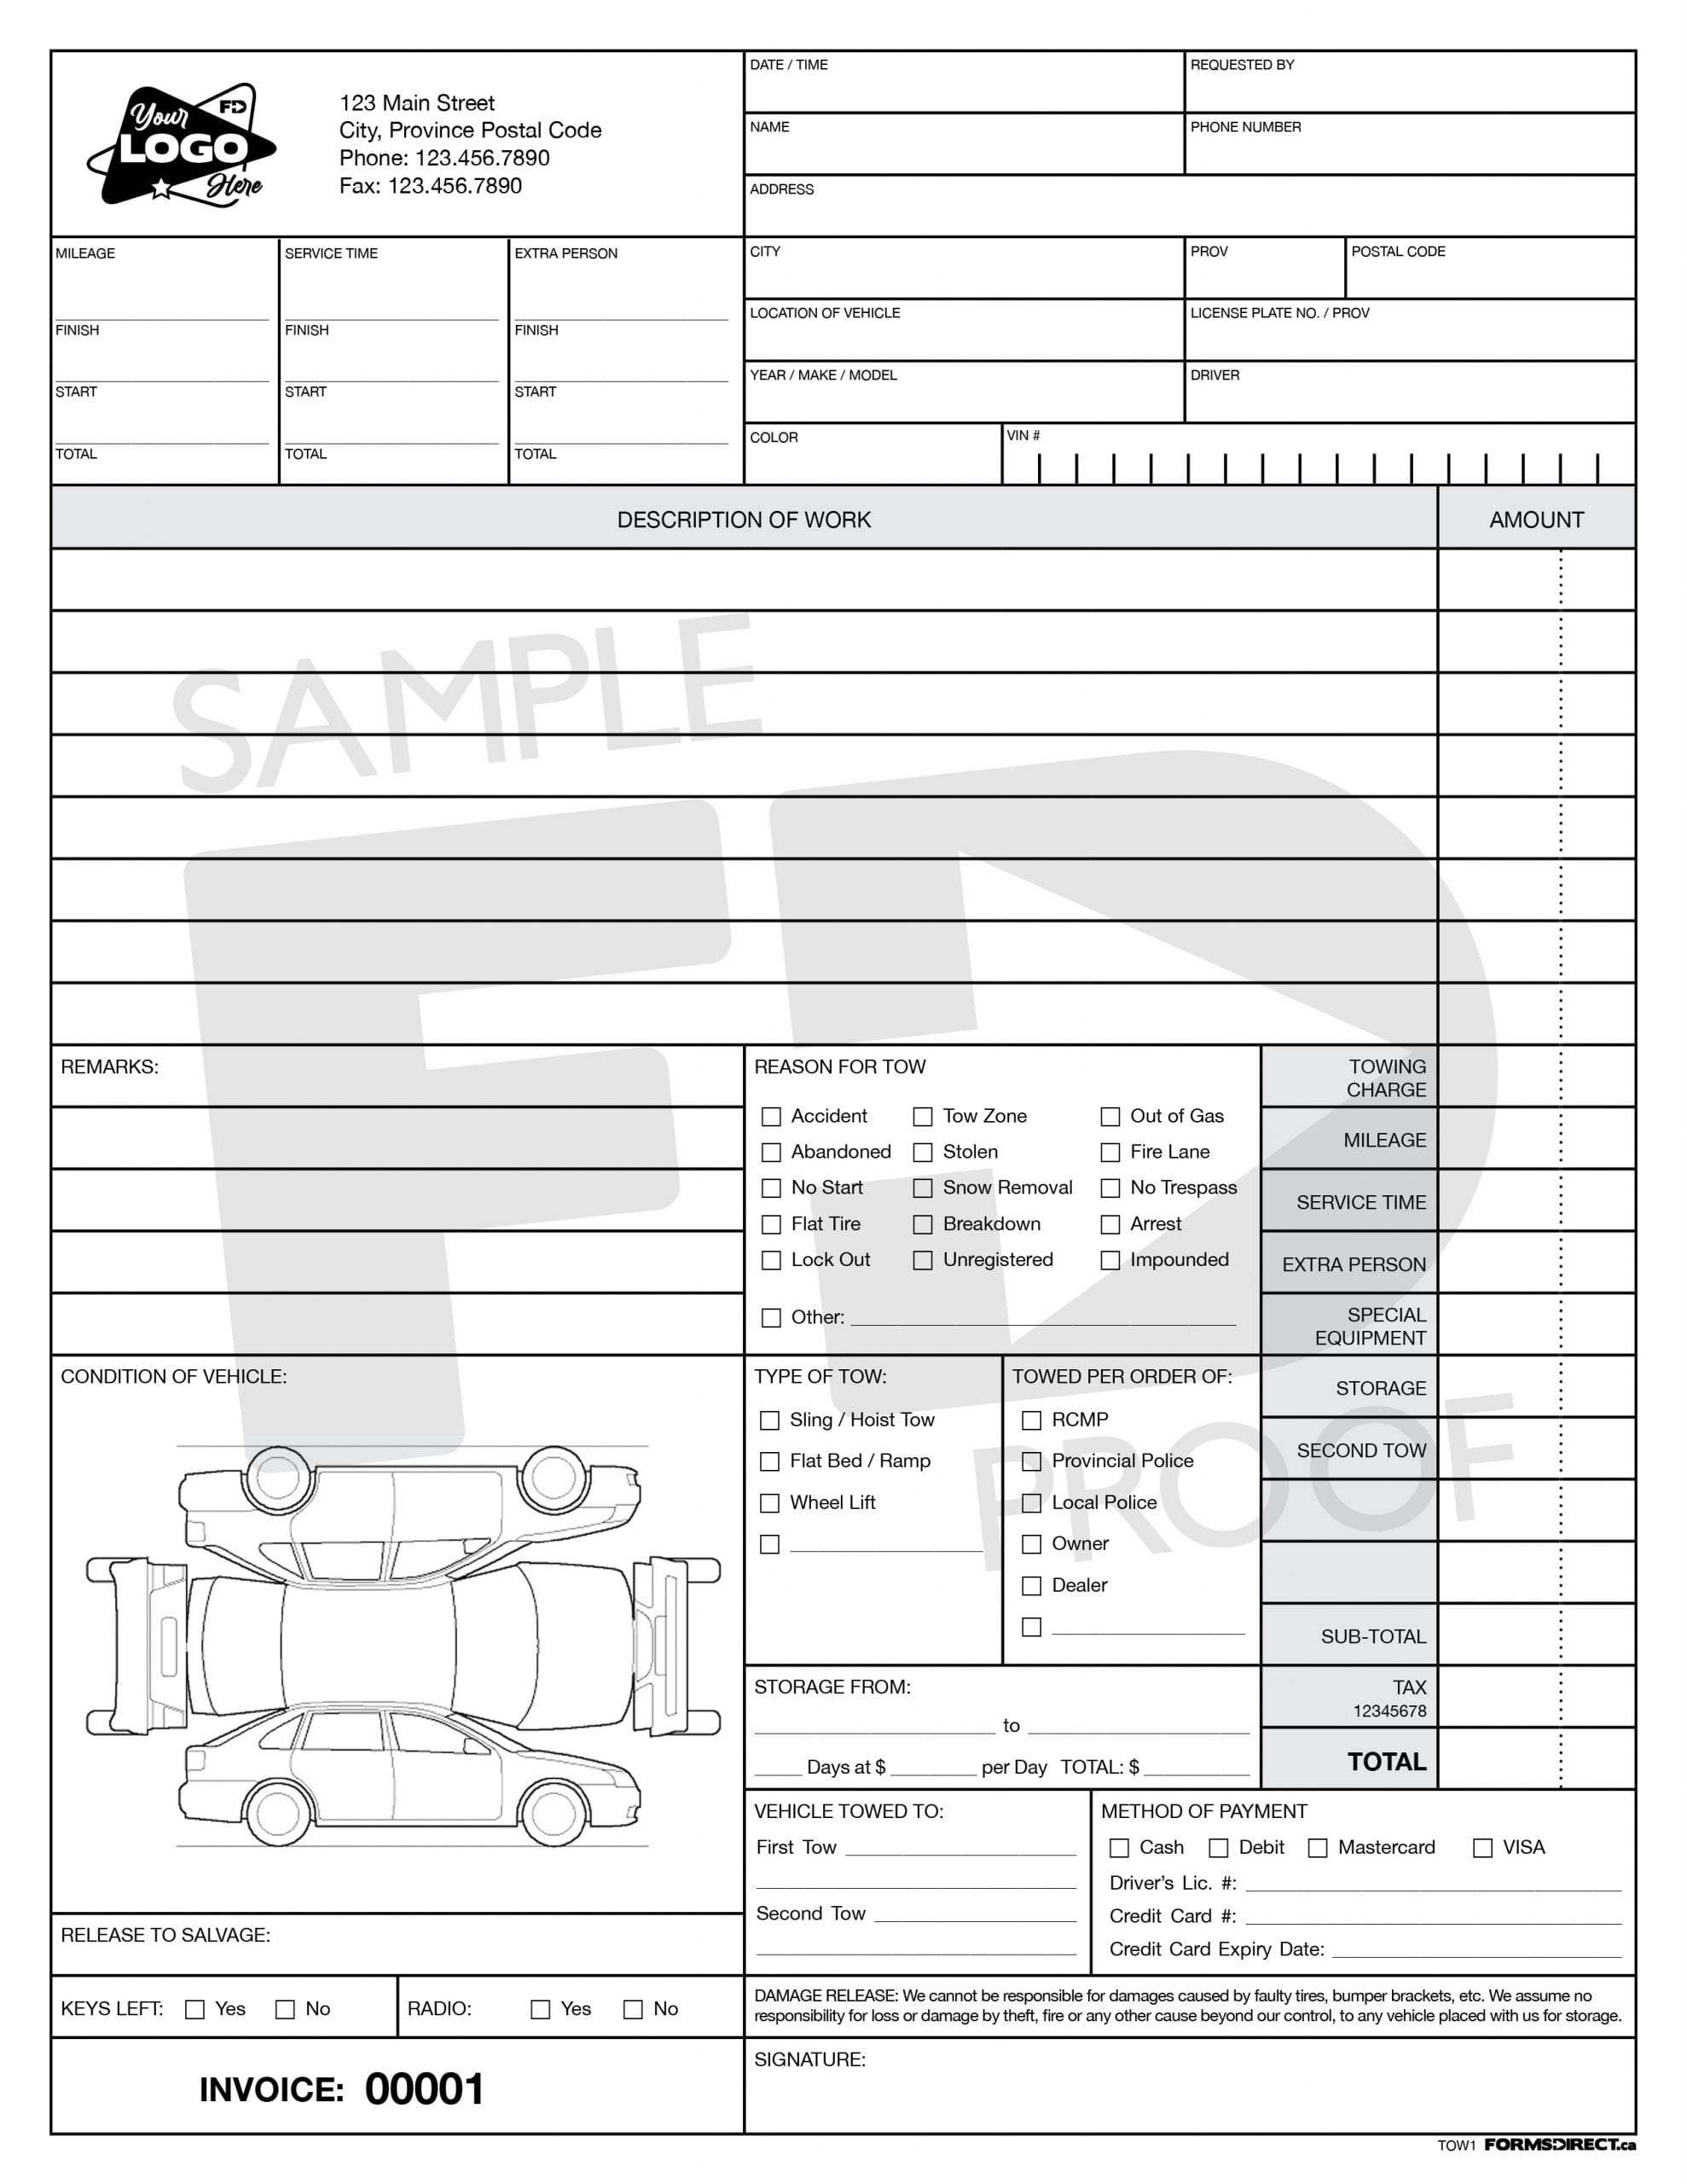 8-best-towing-invoice-images-on-pinterest-tow-truck-trucks-and